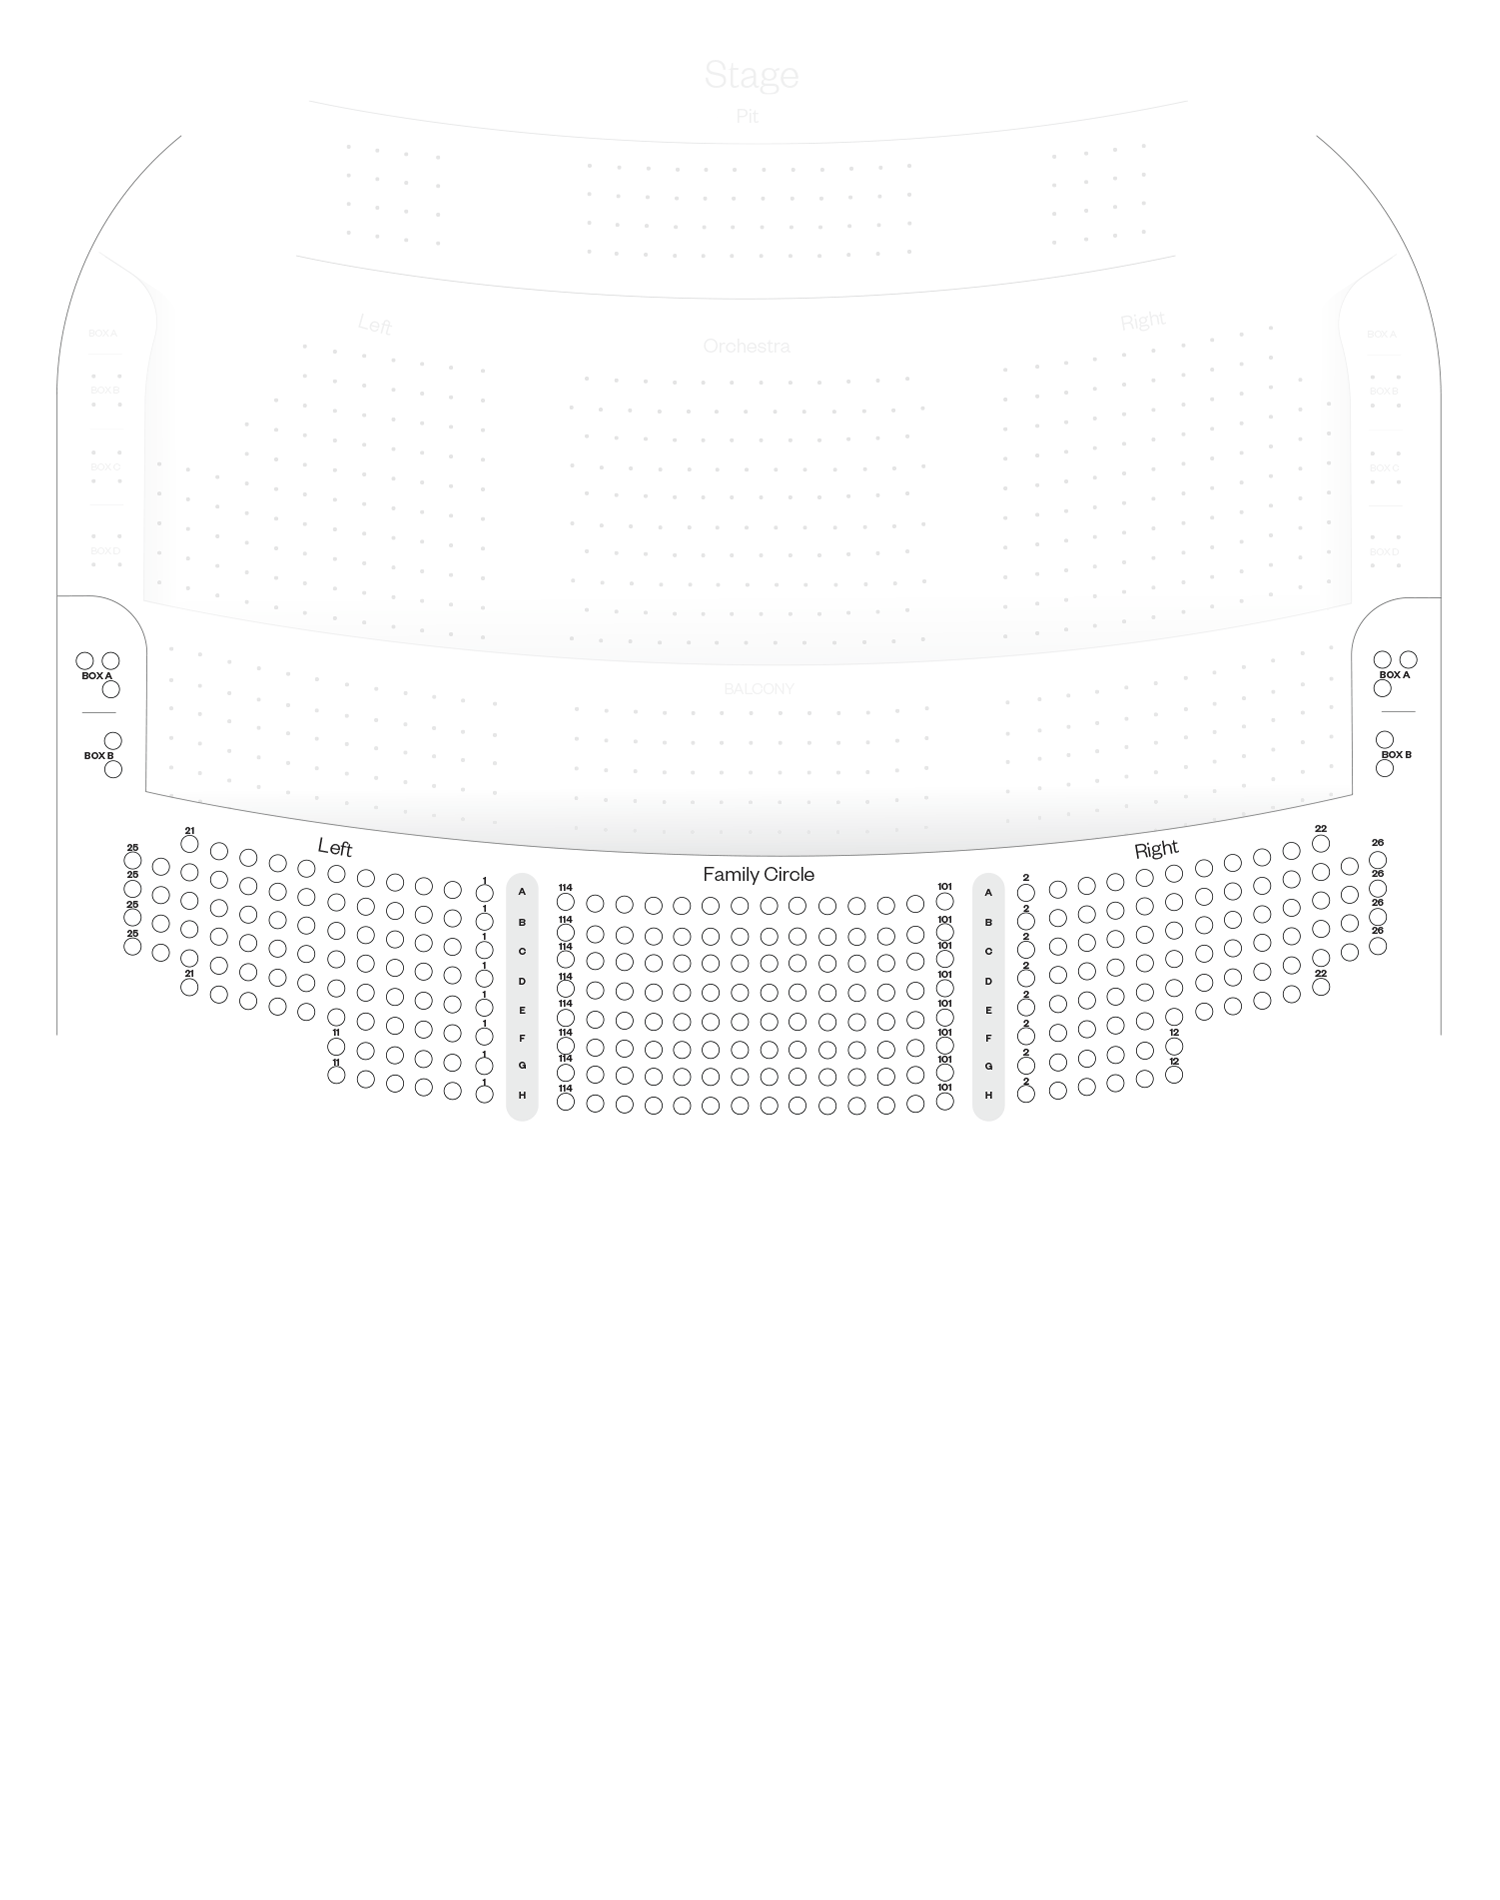 Miller Theater Family Circle Seating Chart